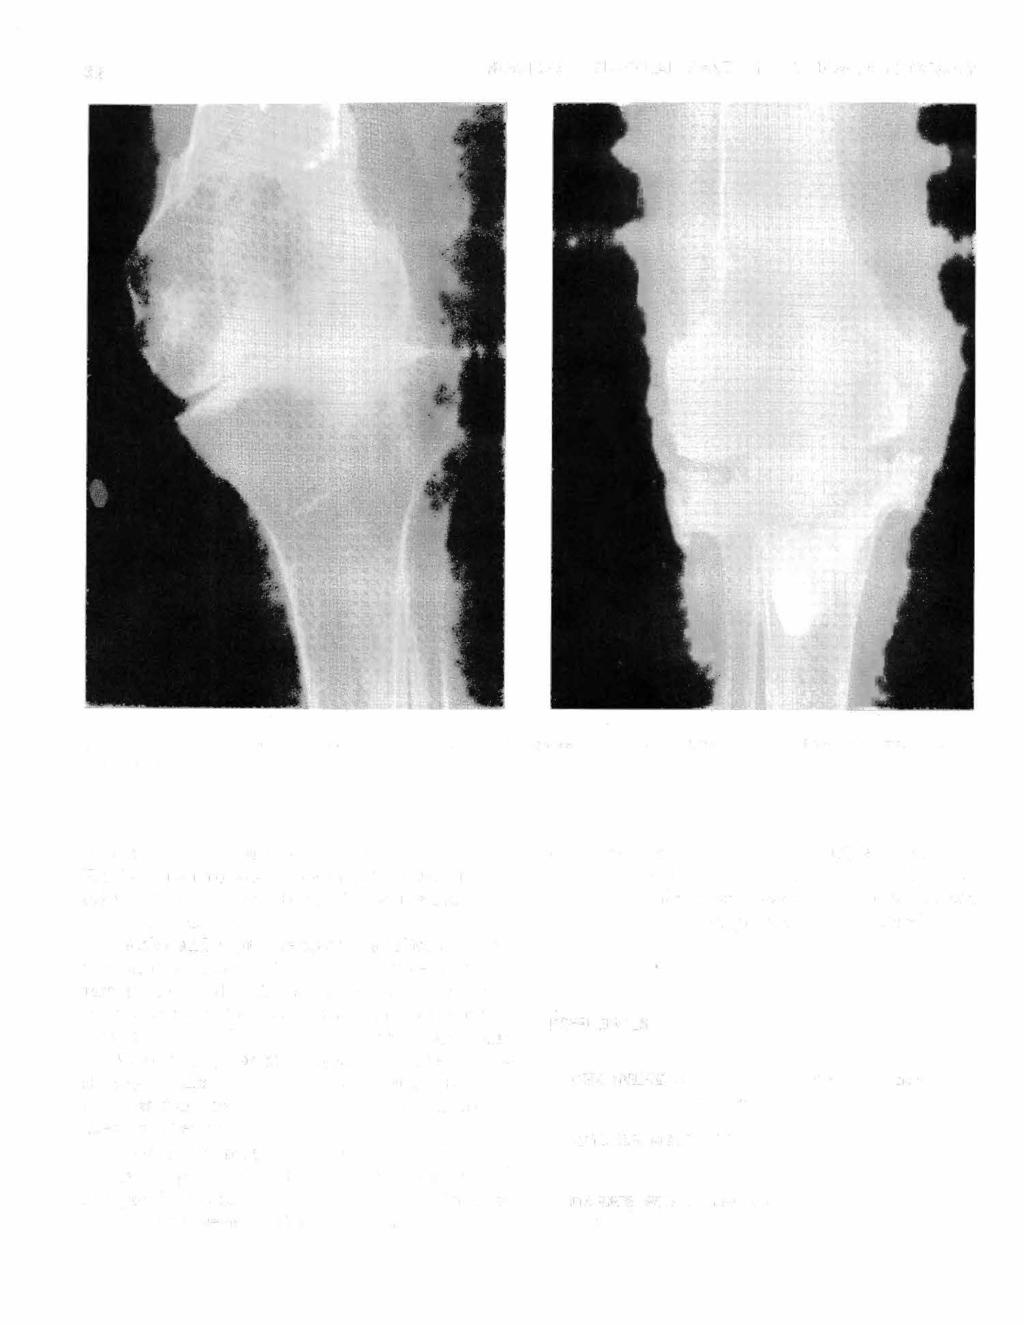 32 THOMPSON: SURGICAL CARE OF THE LOWER EXTREMITY Fig. 15 A, B-Pre- and postoperative x-rays of knee with severe osteoporosis where geometric knee joint was used for arthroplasty.